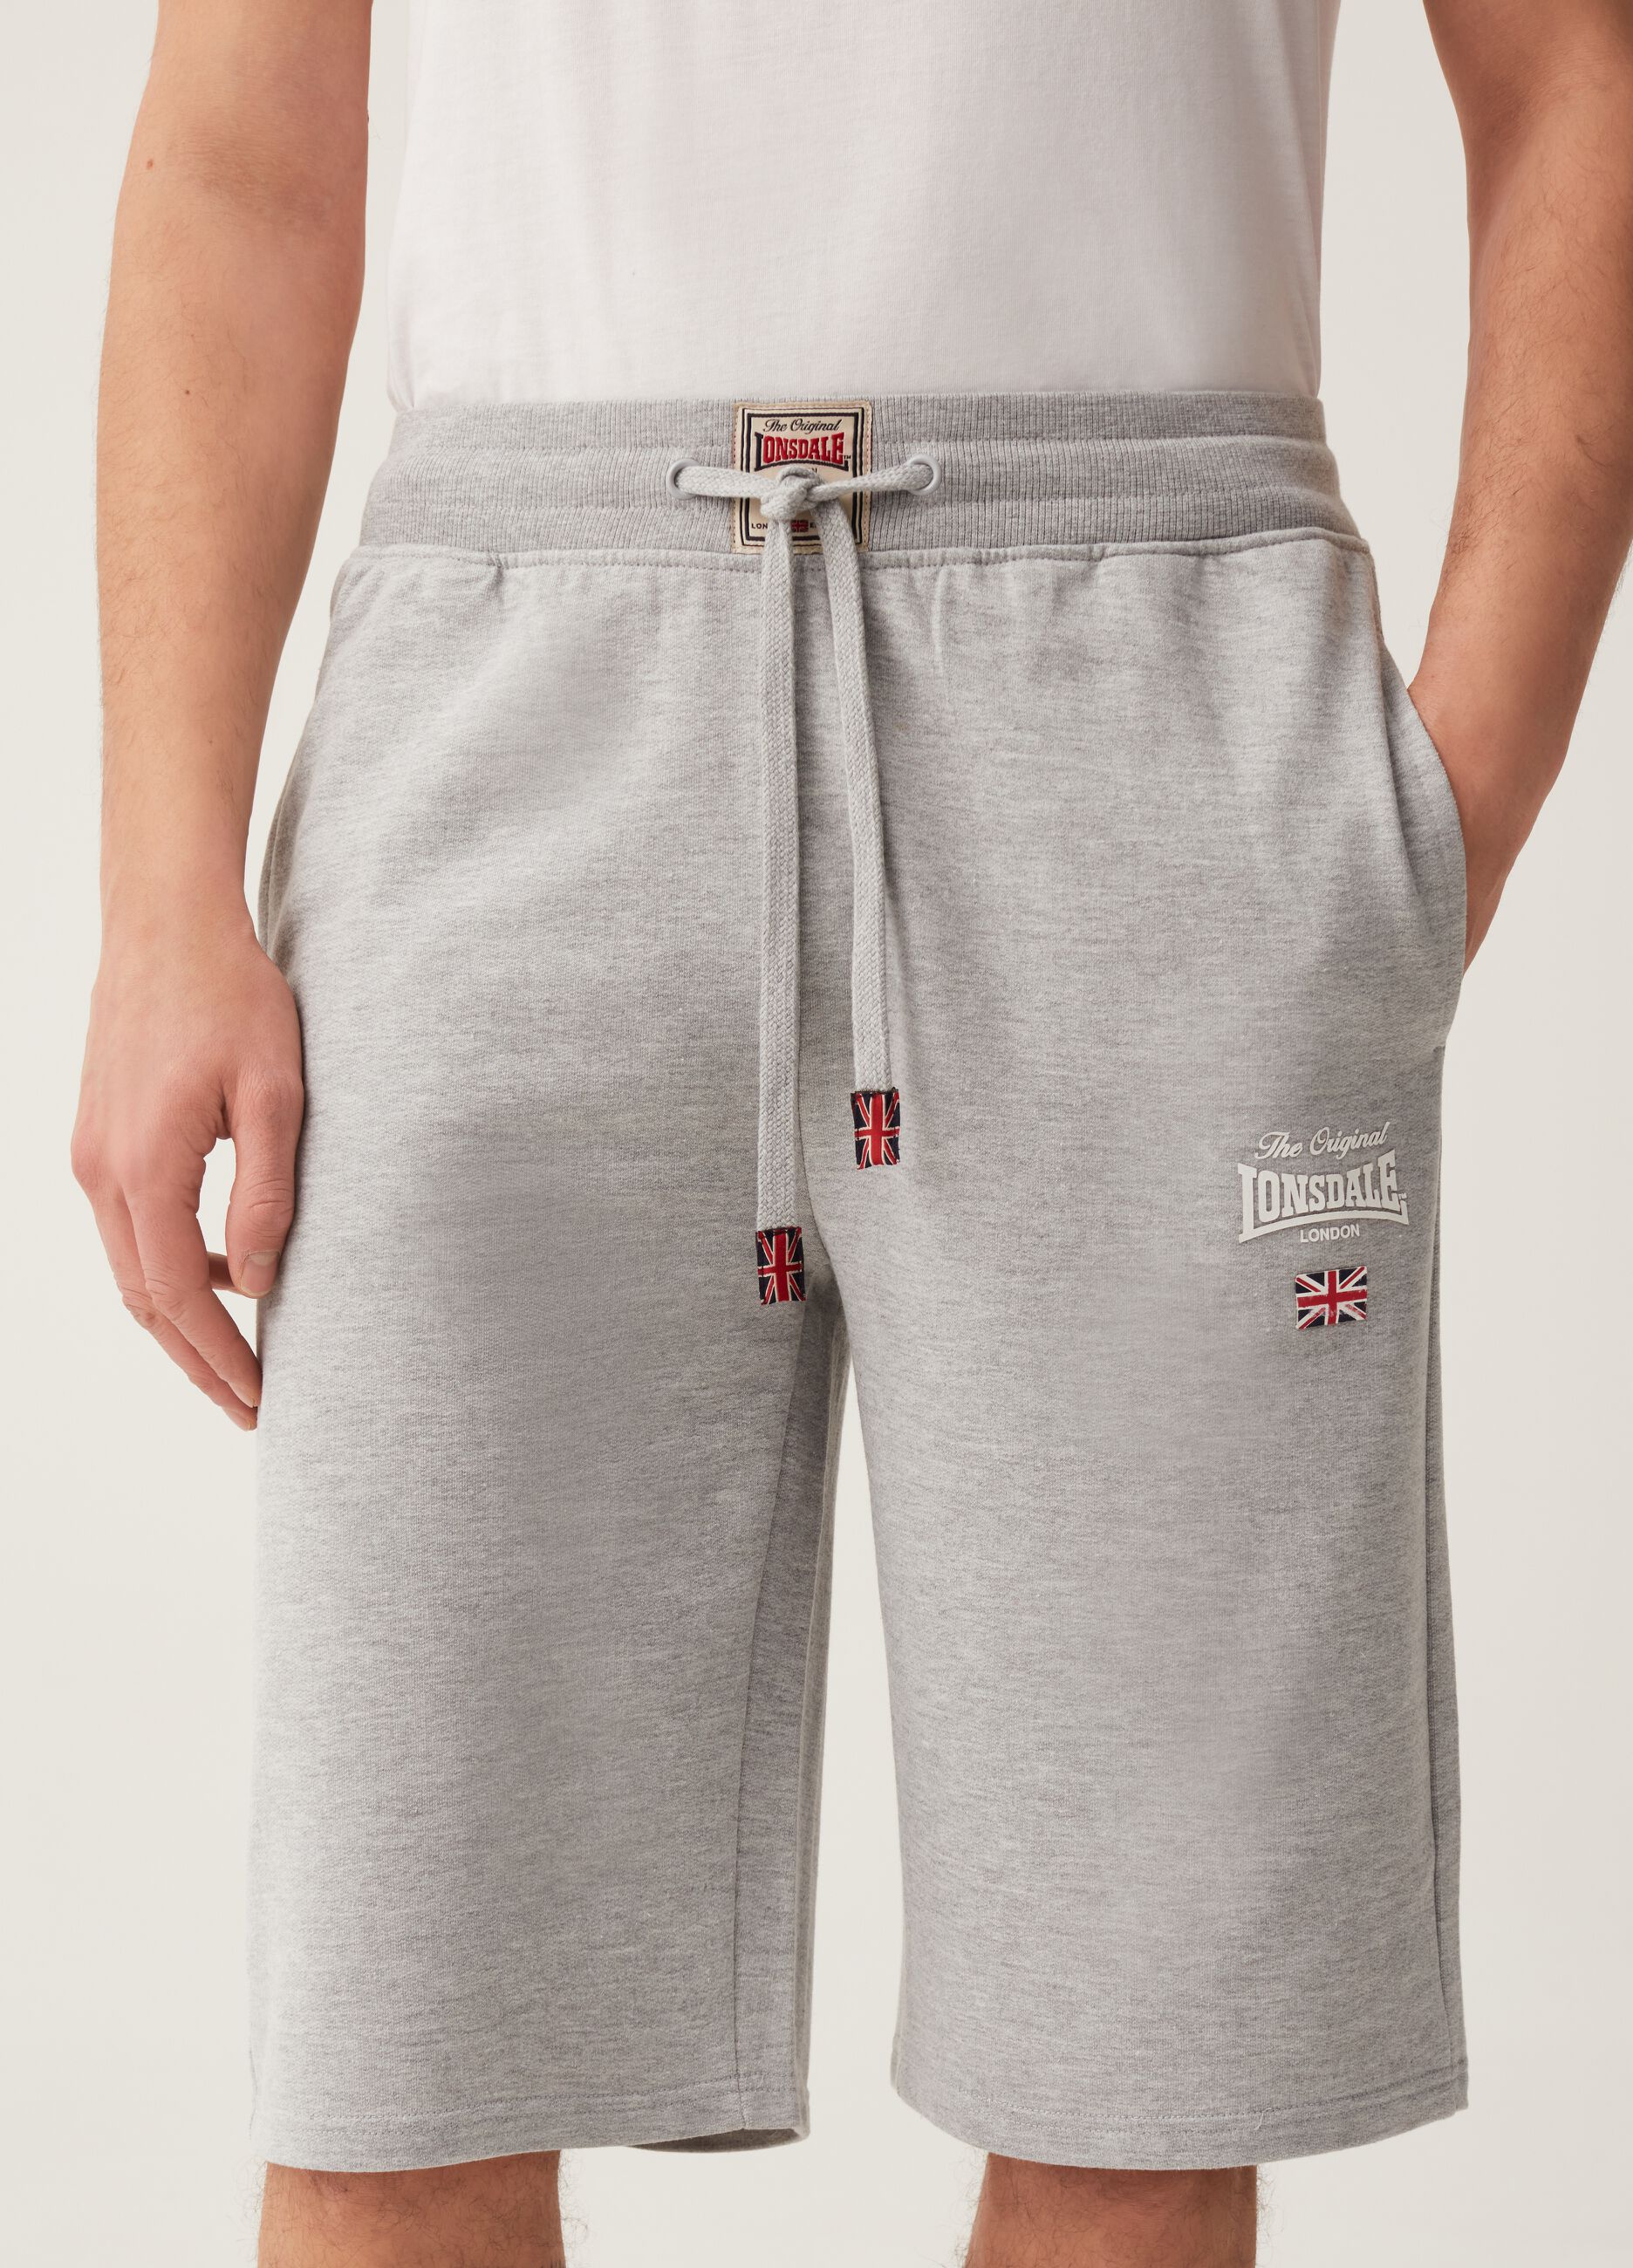 Plush Bermuda joggers with Lonsdale print